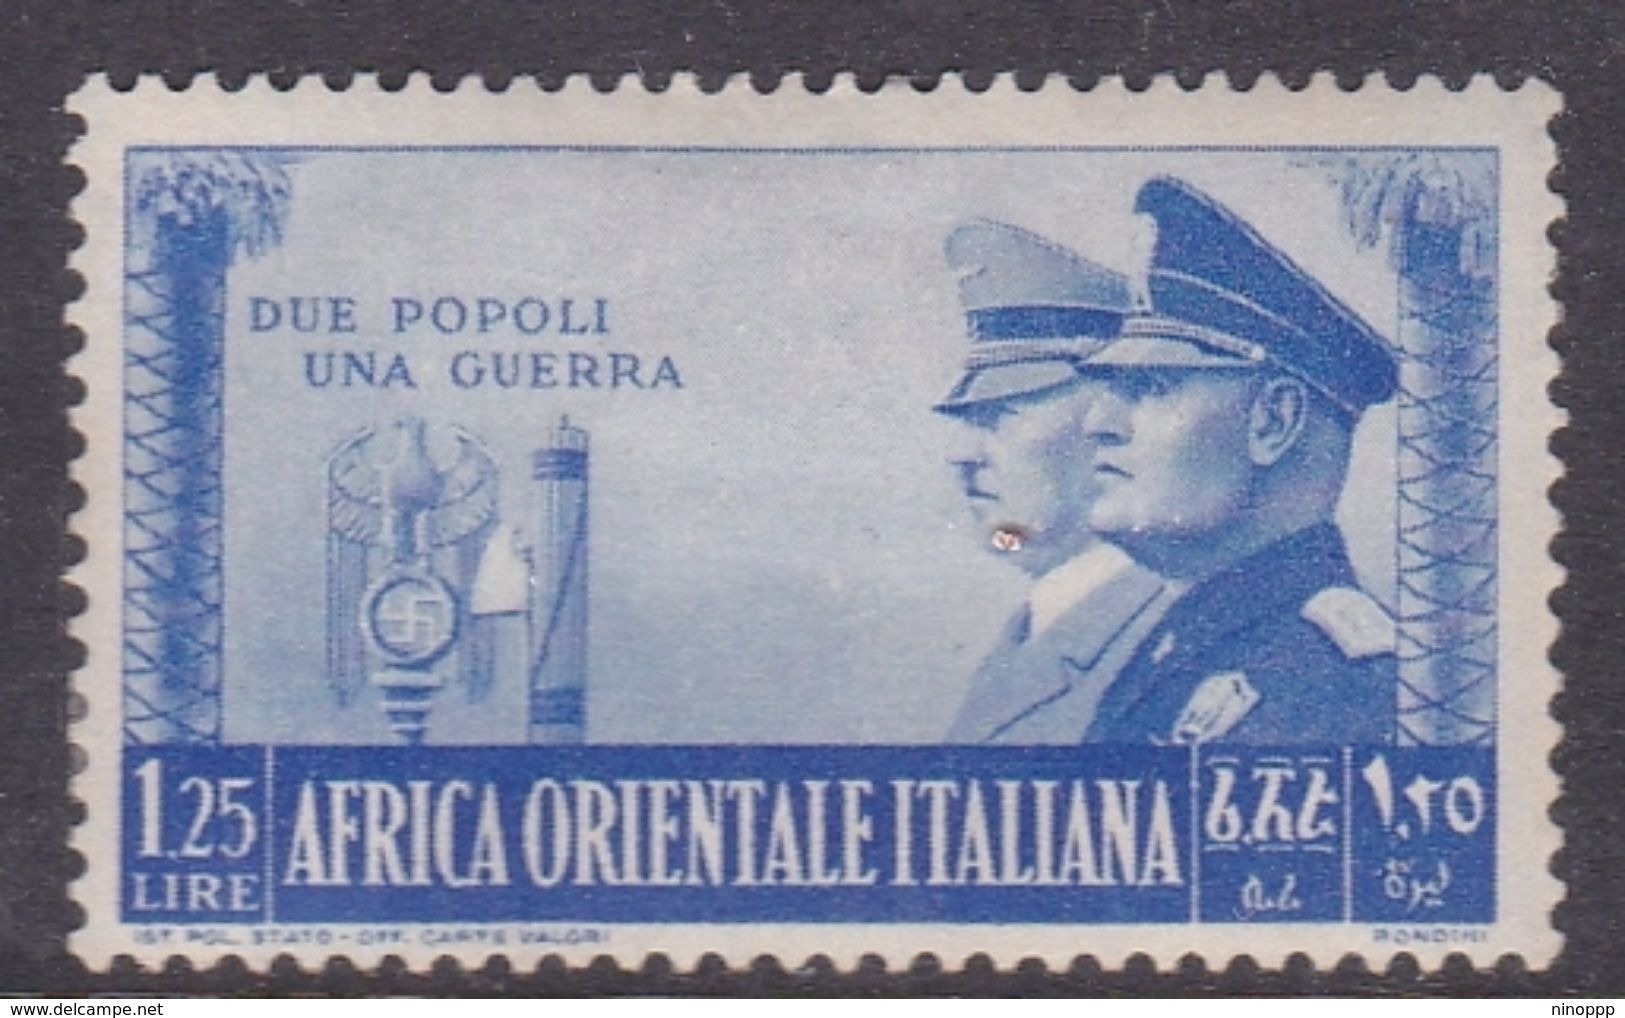 Italy-Colonies And Territories-Italian Eastern Africa S40 1941 Two Peoples One War 1,25 Lira Bright Ultra MH - General Issues